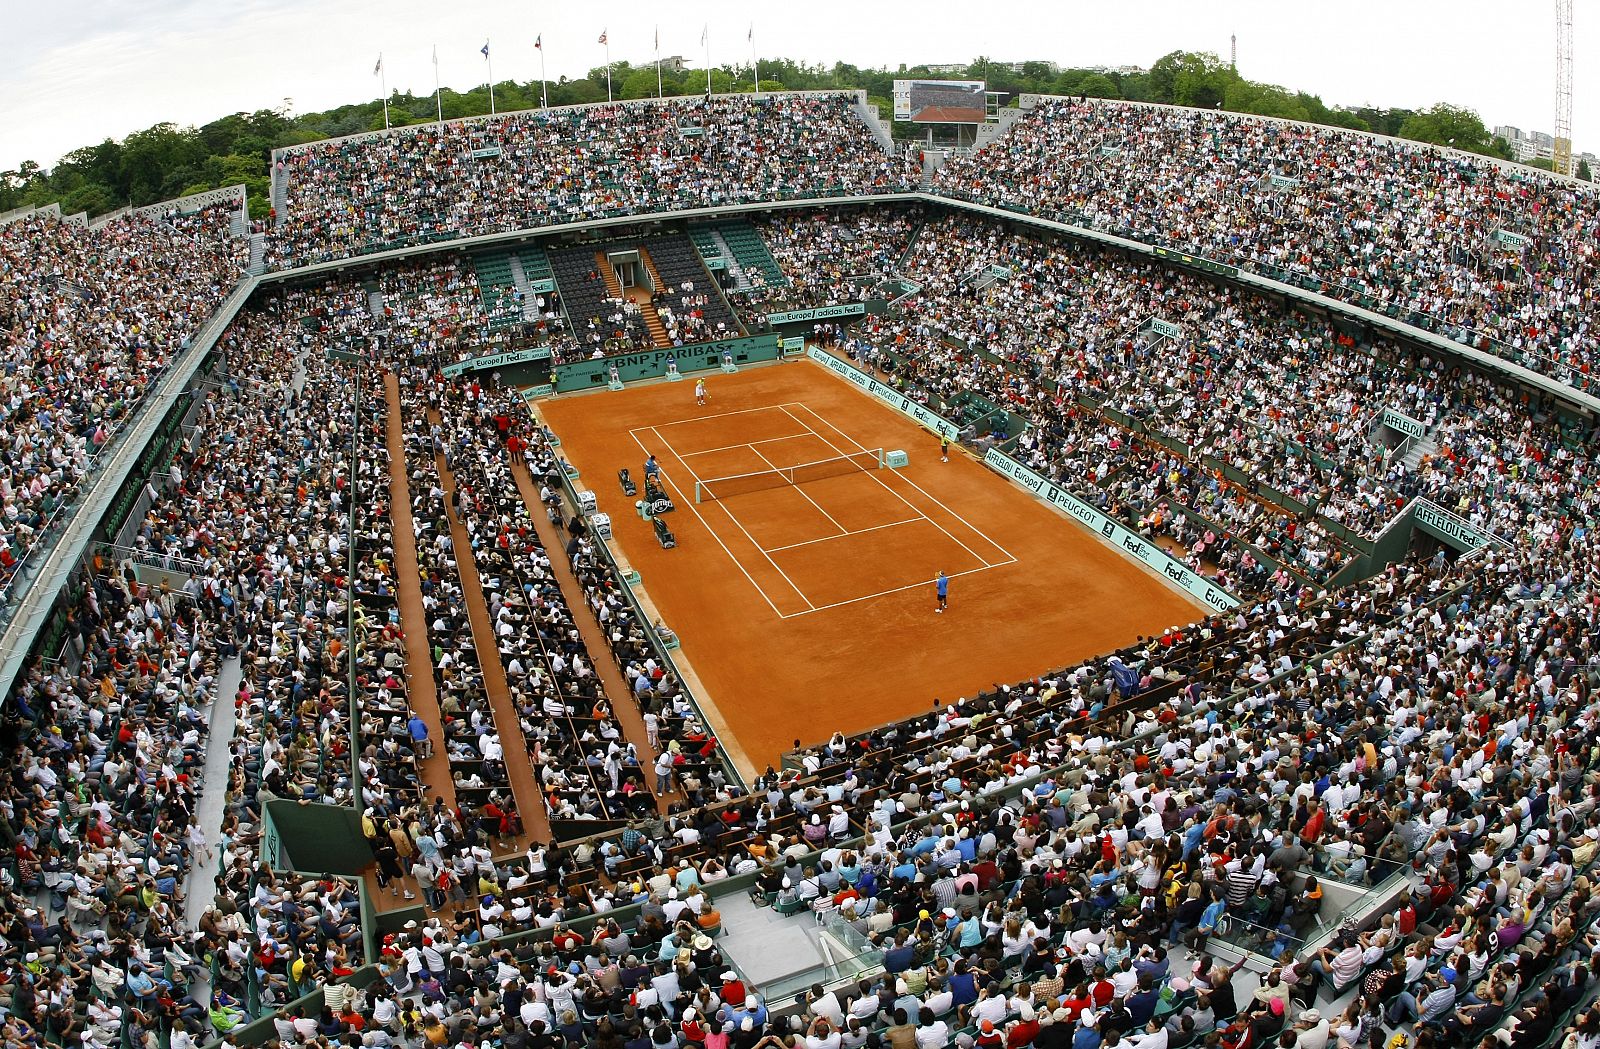 Spectators fill up the Philippe Chatrier court at Roland Garros in Paris